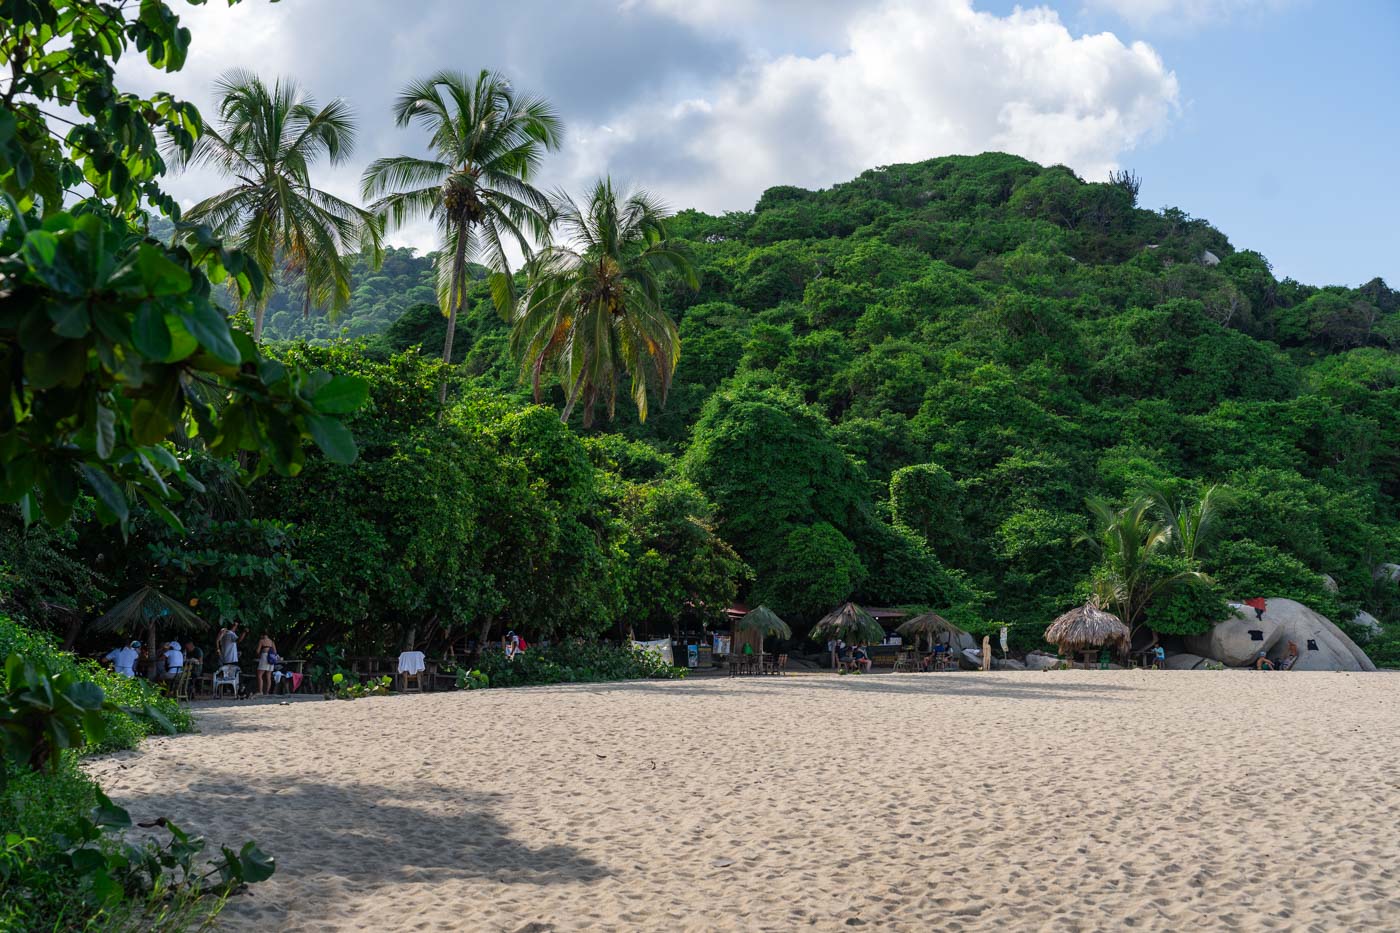 A few tourists and cabanas in the tree line along Playa Arenilla in Tayrona National Park.